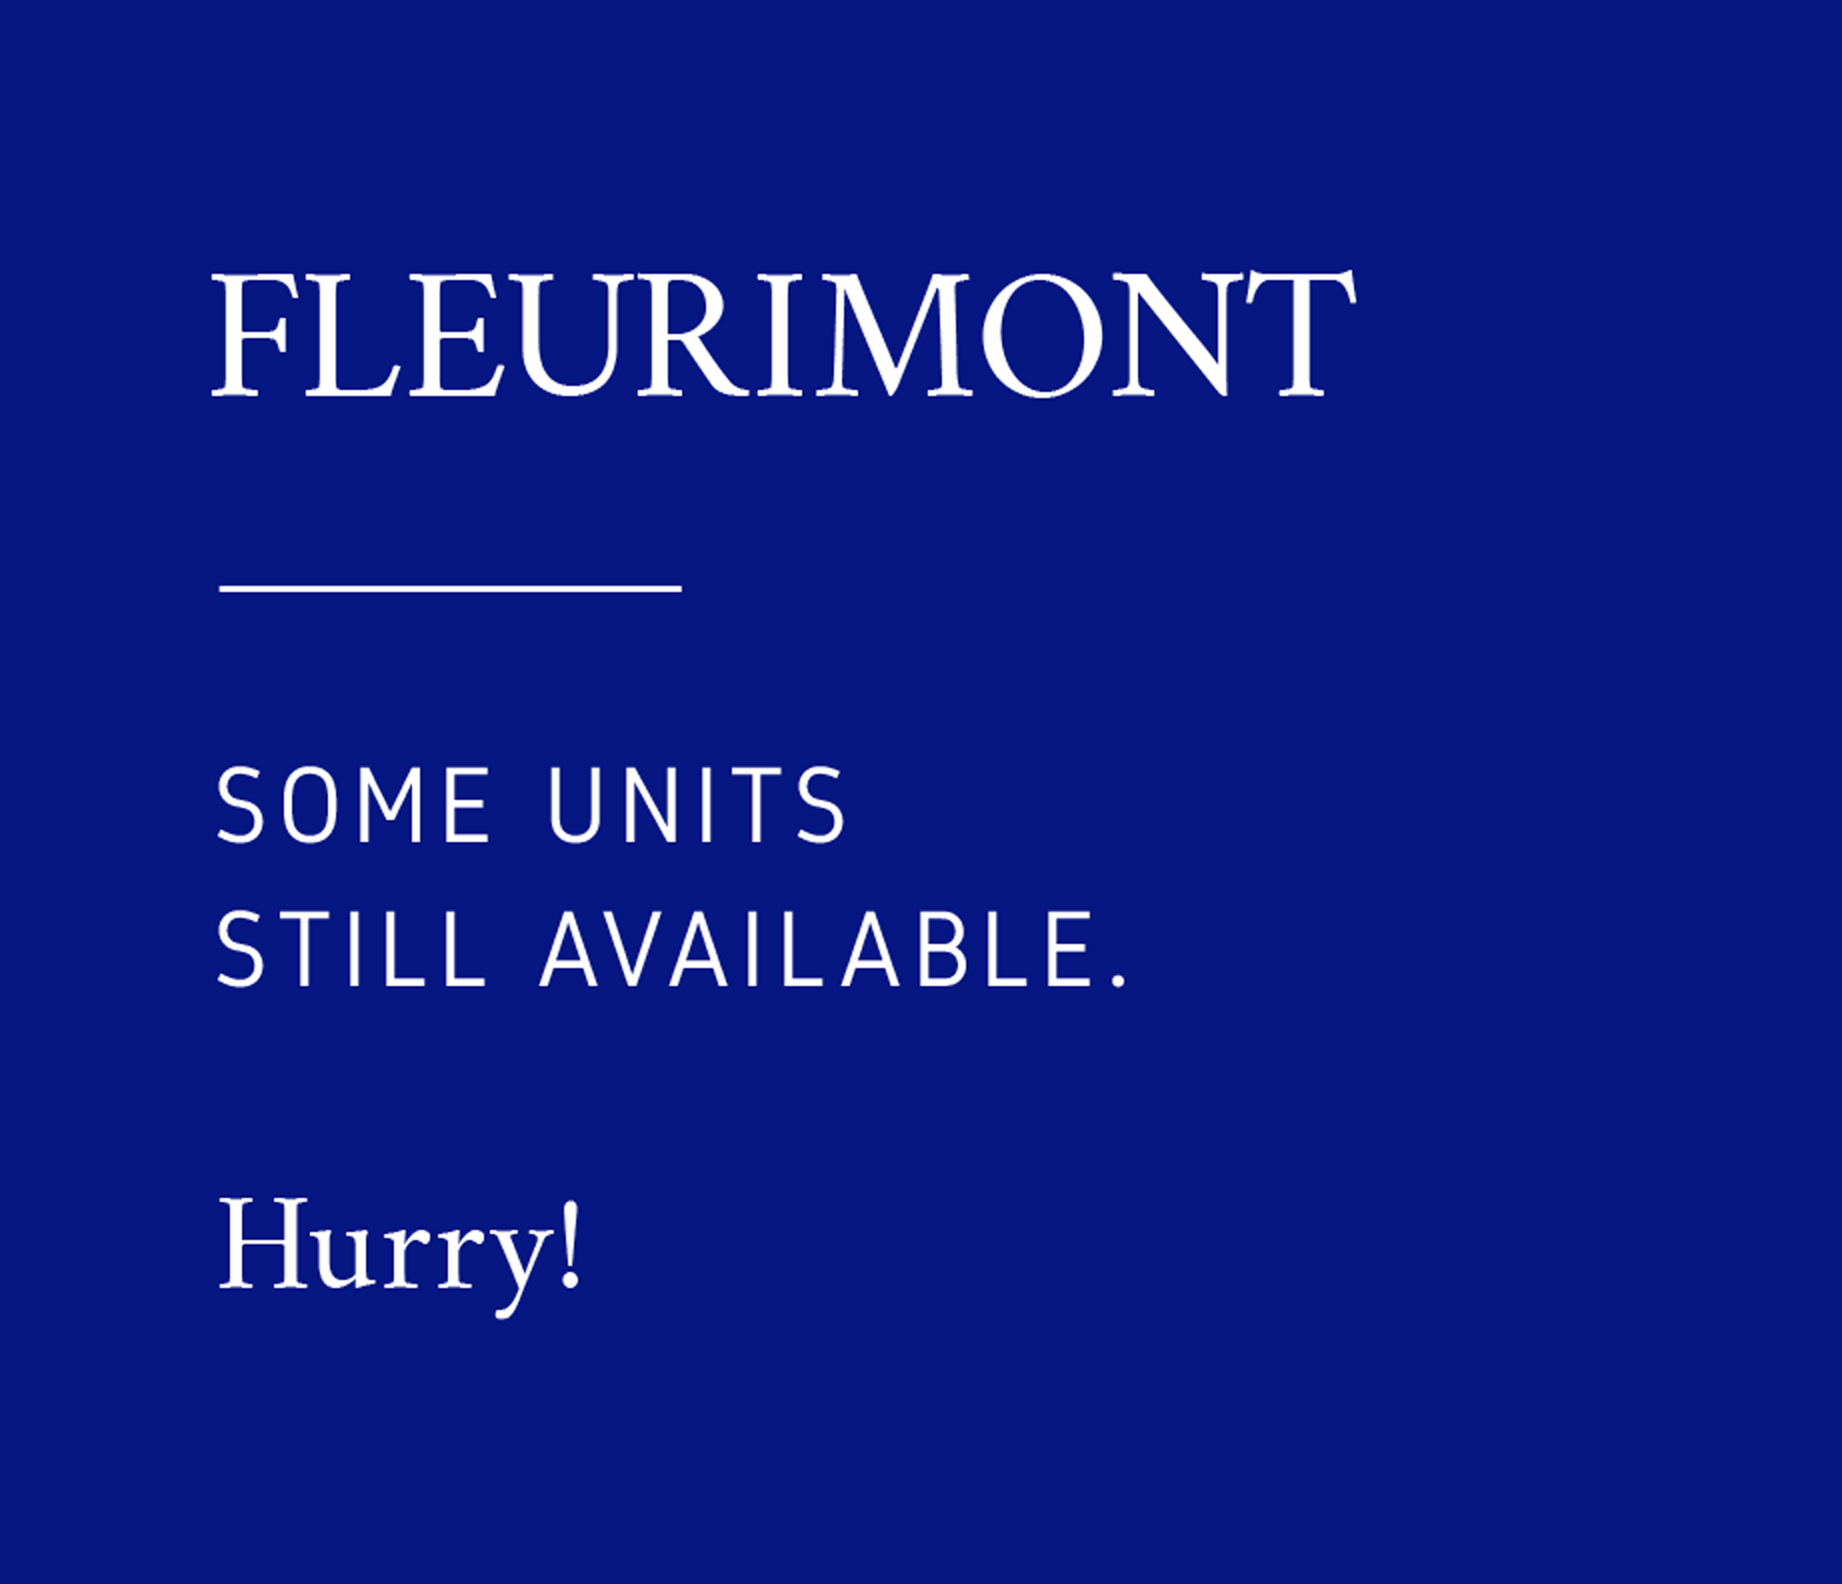 Fleurimont - Some units still available